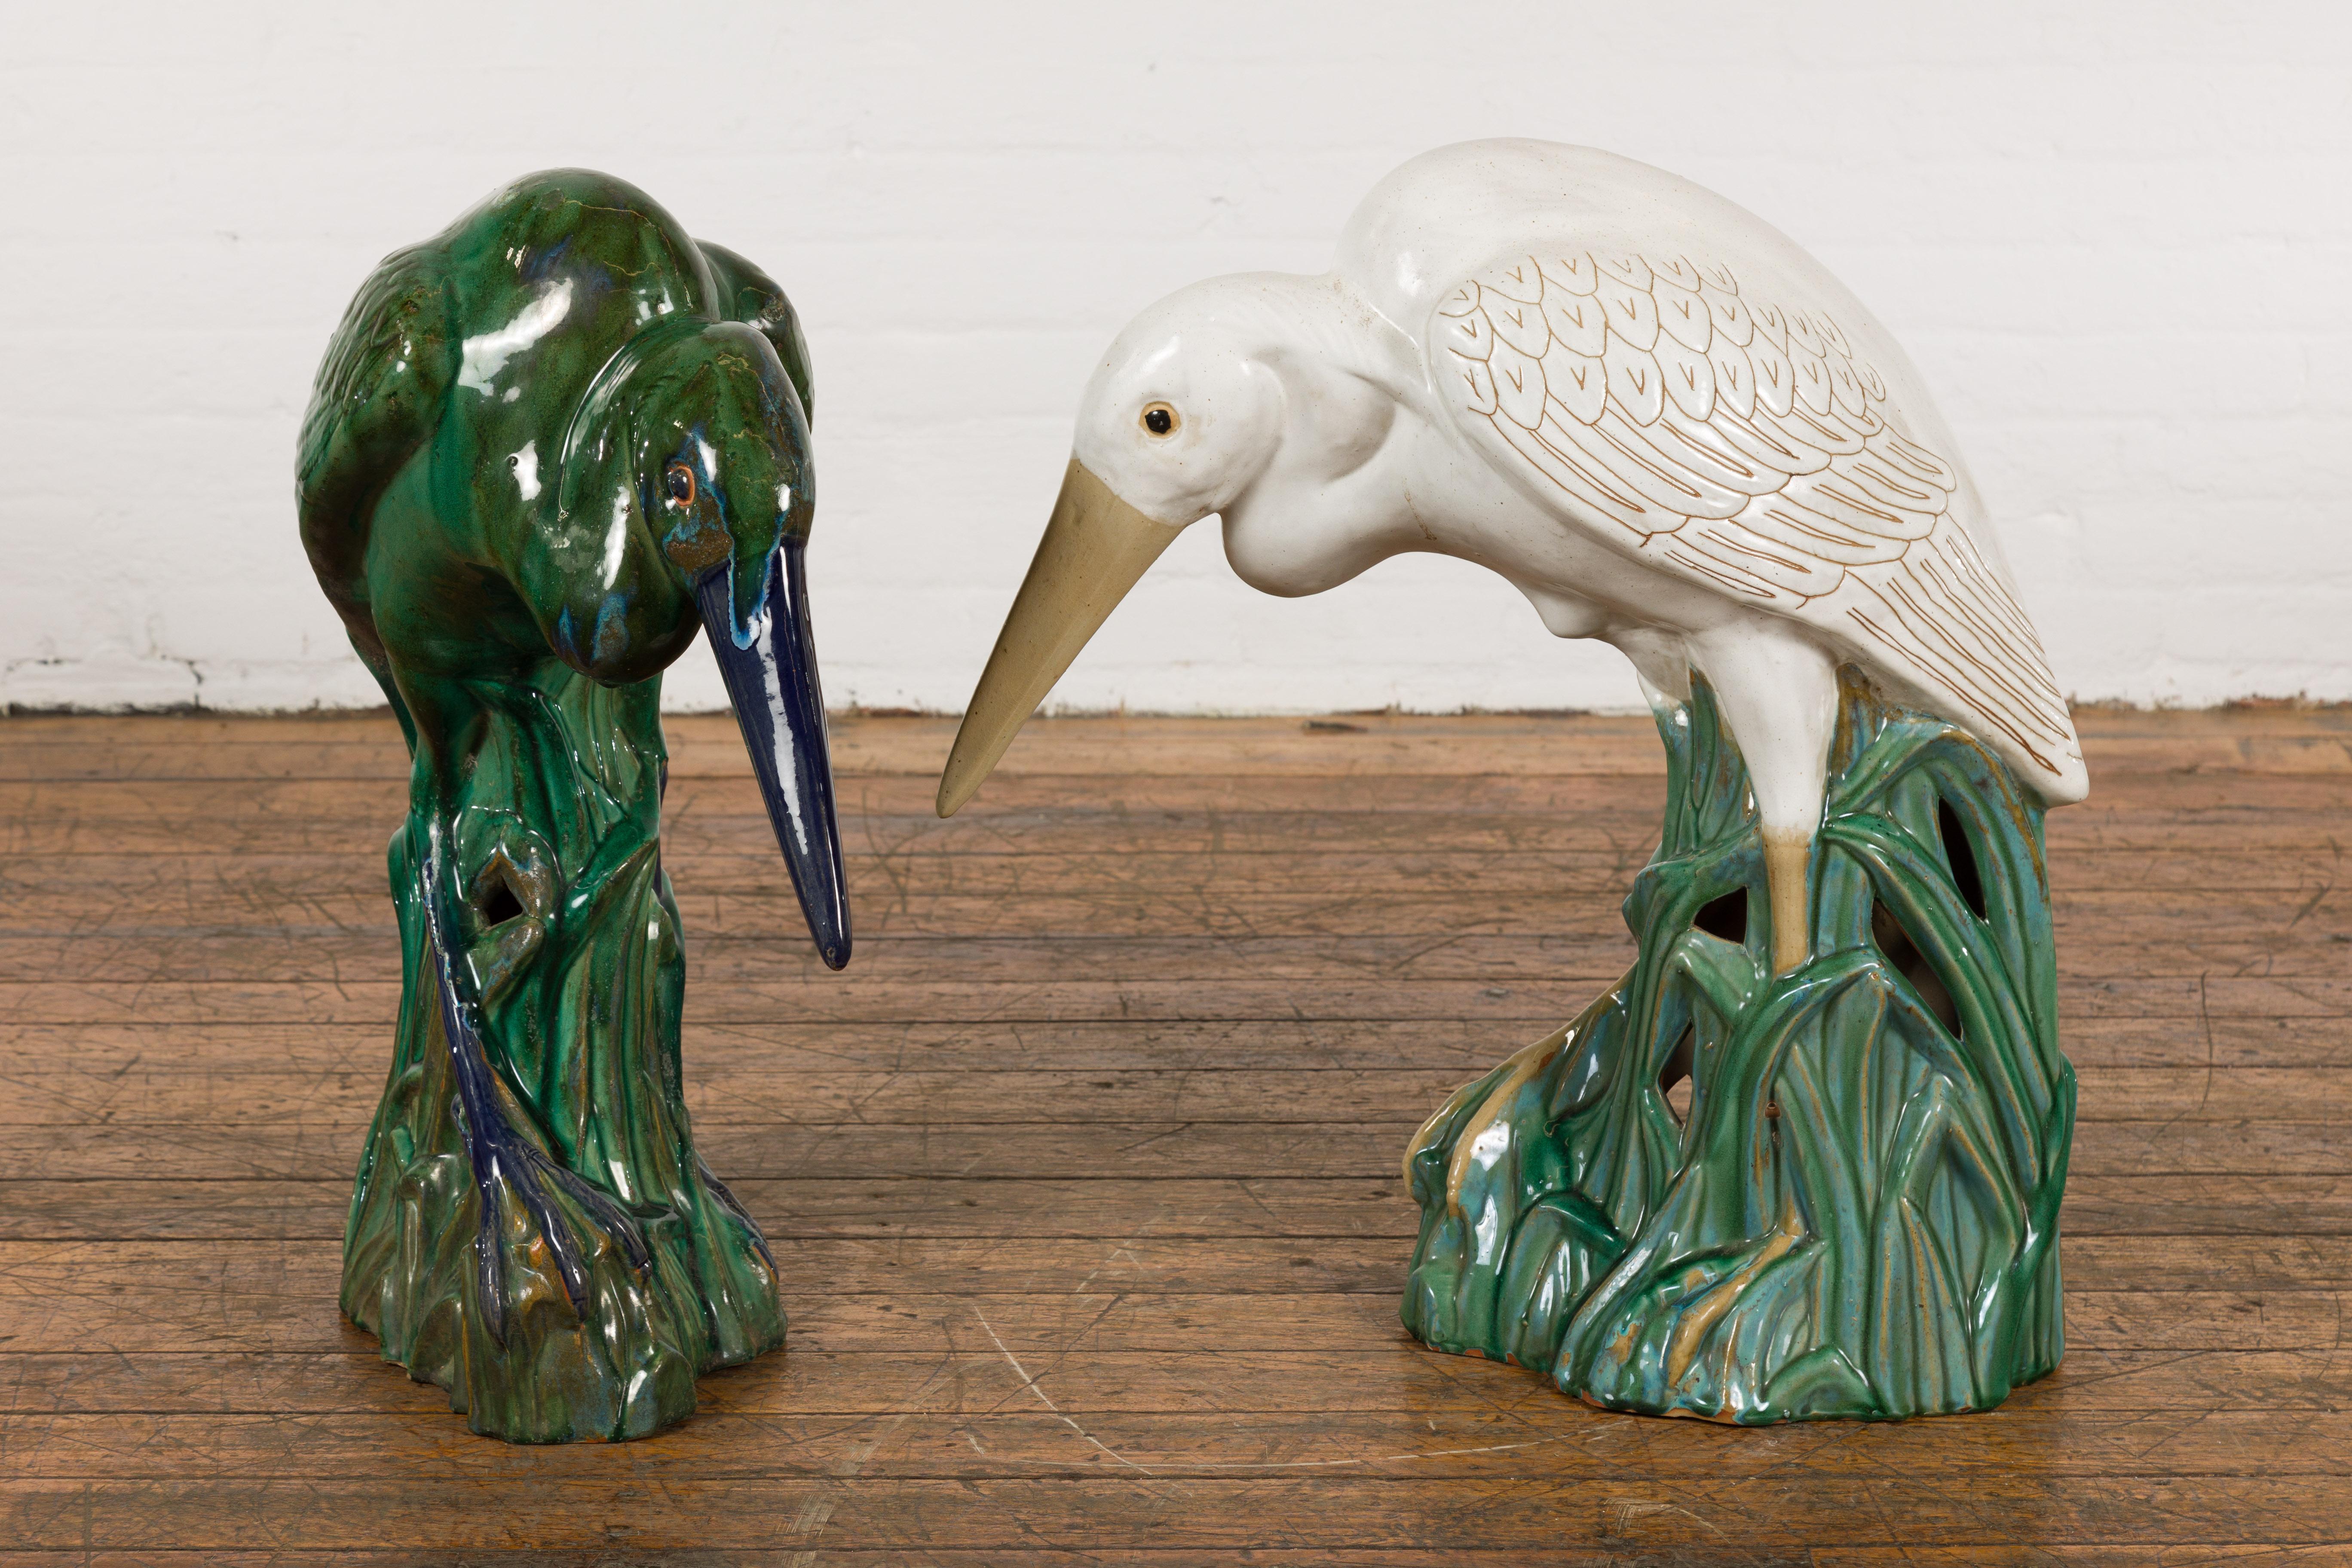 Lifesize Chinese Vintage Green and Blue Glazed Ceramic Heron Bird Sculpture For Sale 9